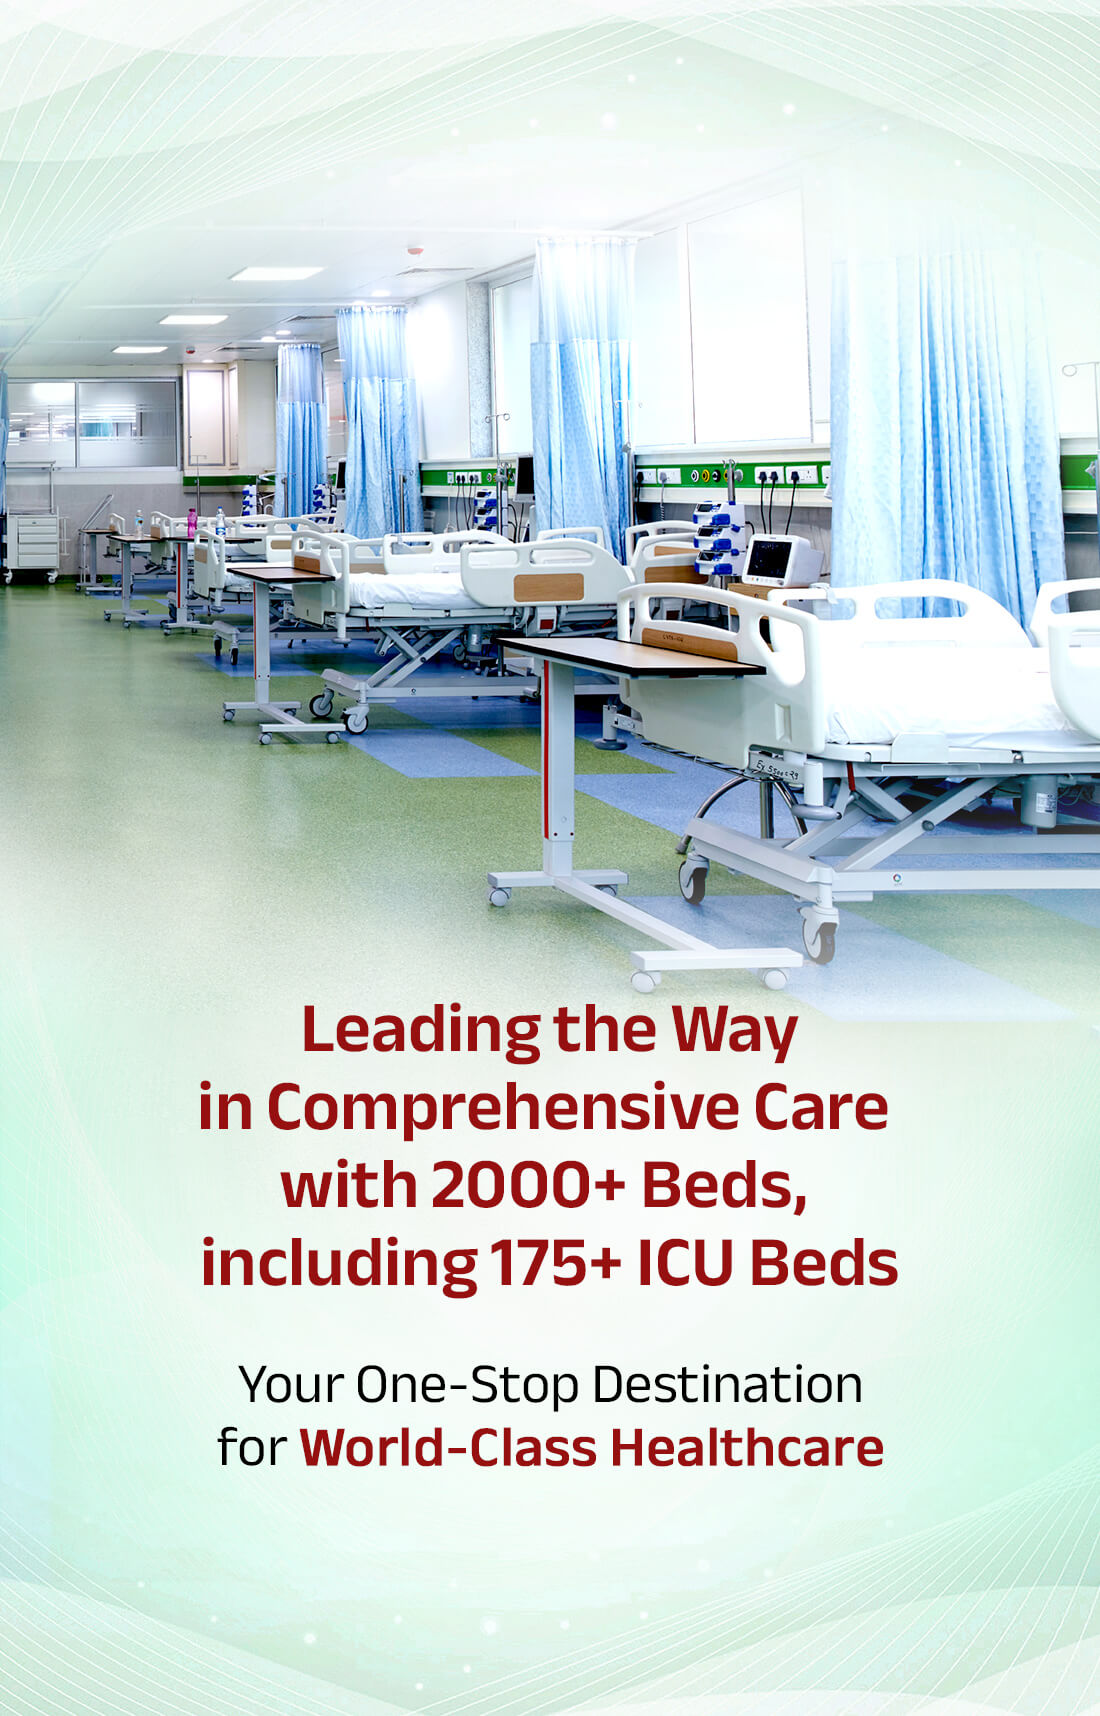 DPU - Best Superspecialty Hospital with 2000+ Beds